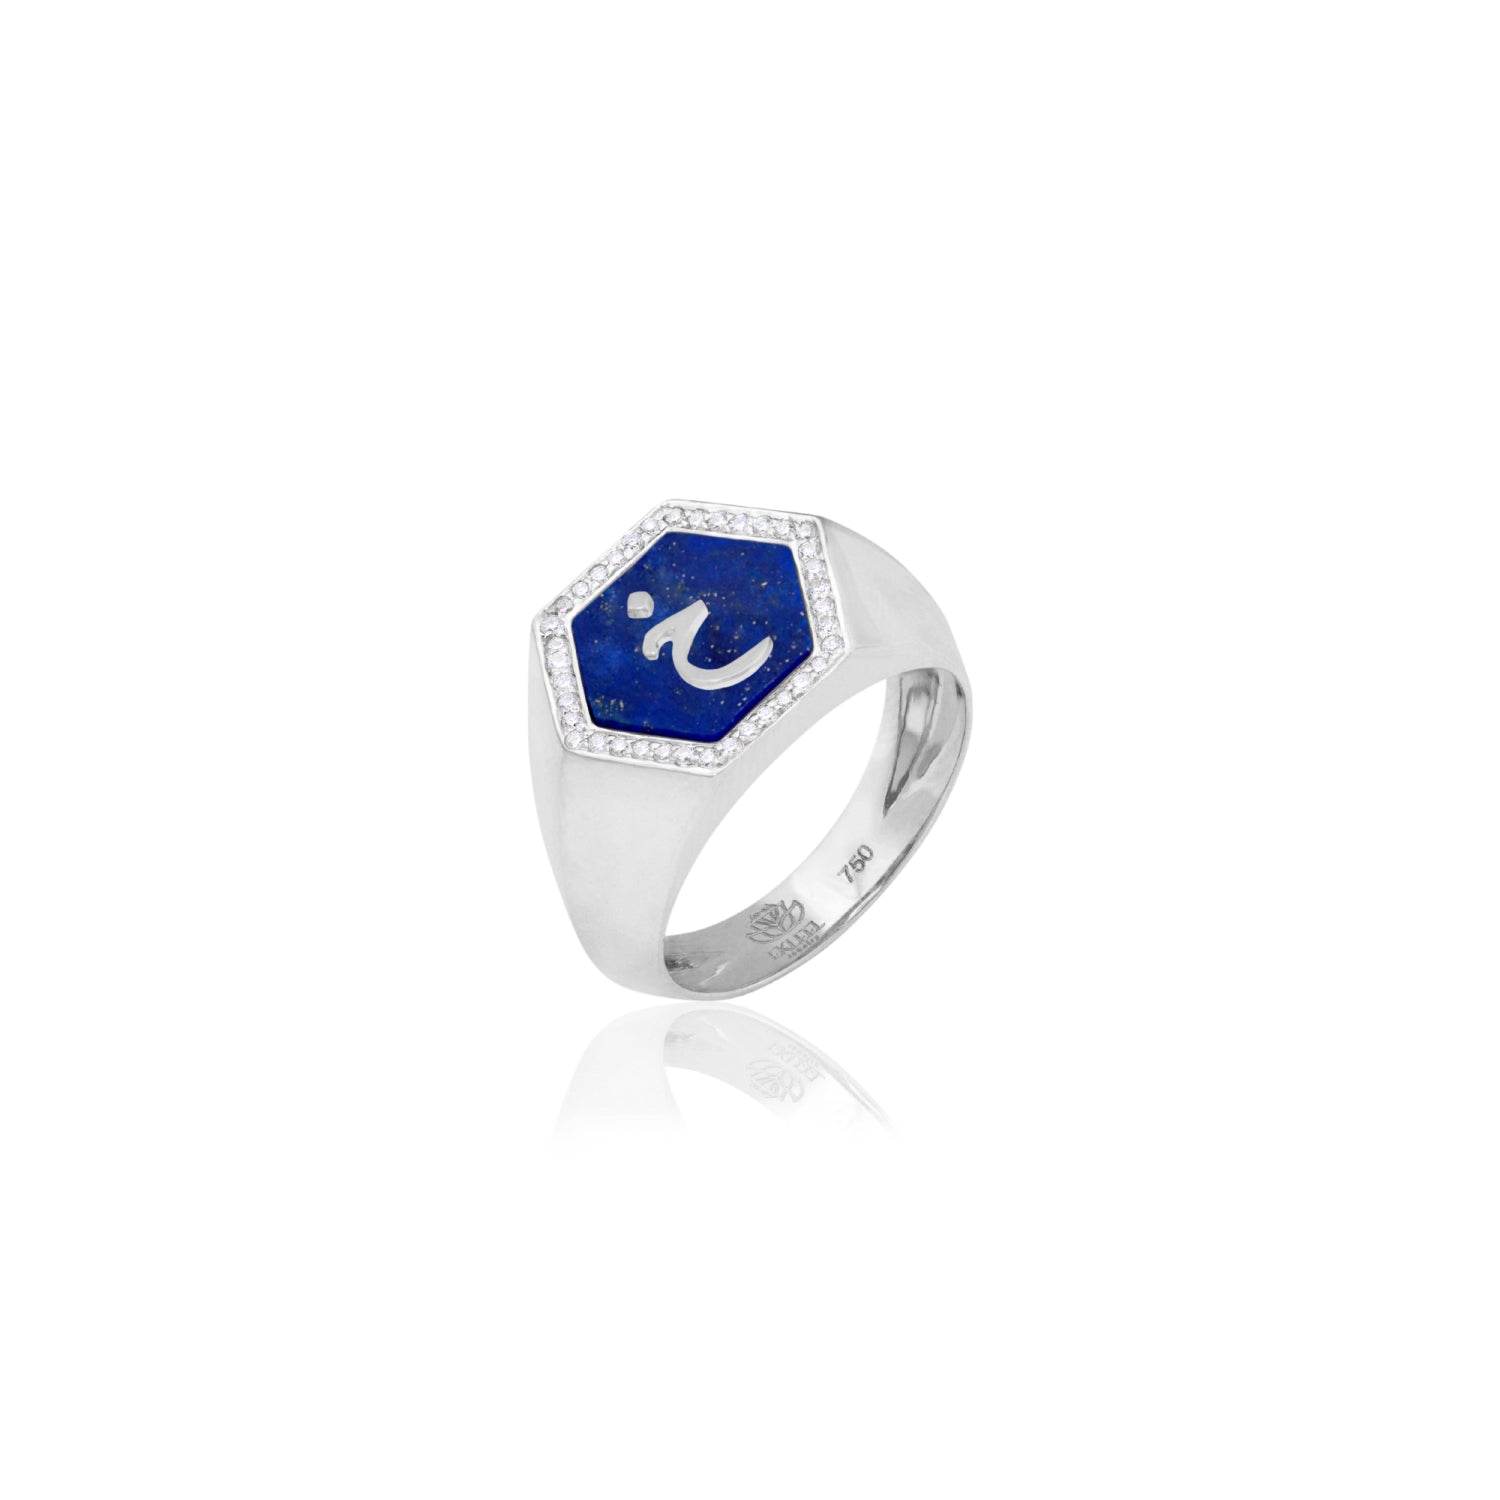 Qamoos 2.0 Letter خ Lapis Lazuli and Diamond Signet Ring in White Gold